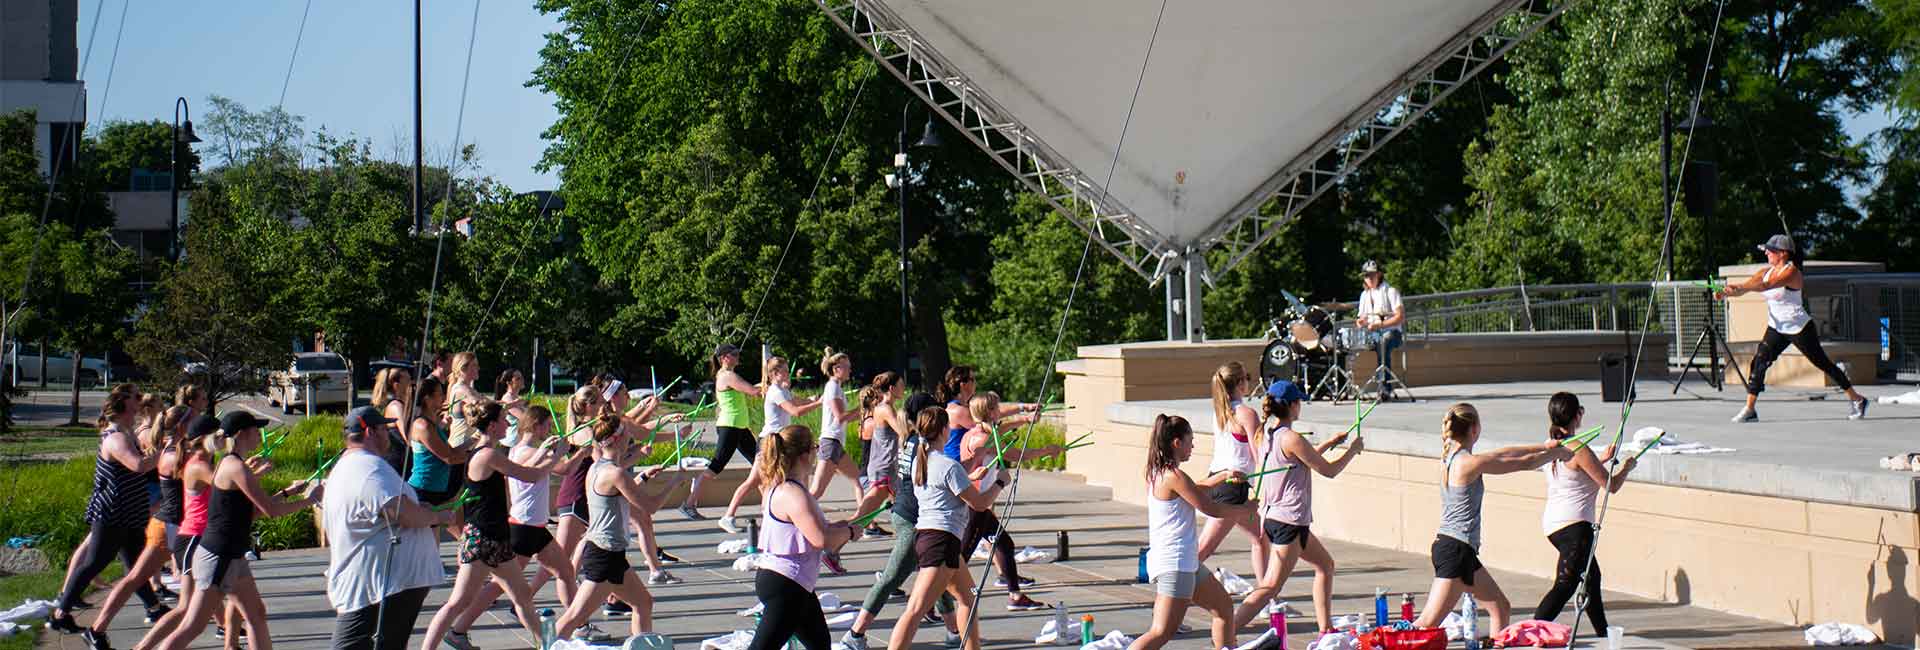 Outdoor workout class in Turner Park